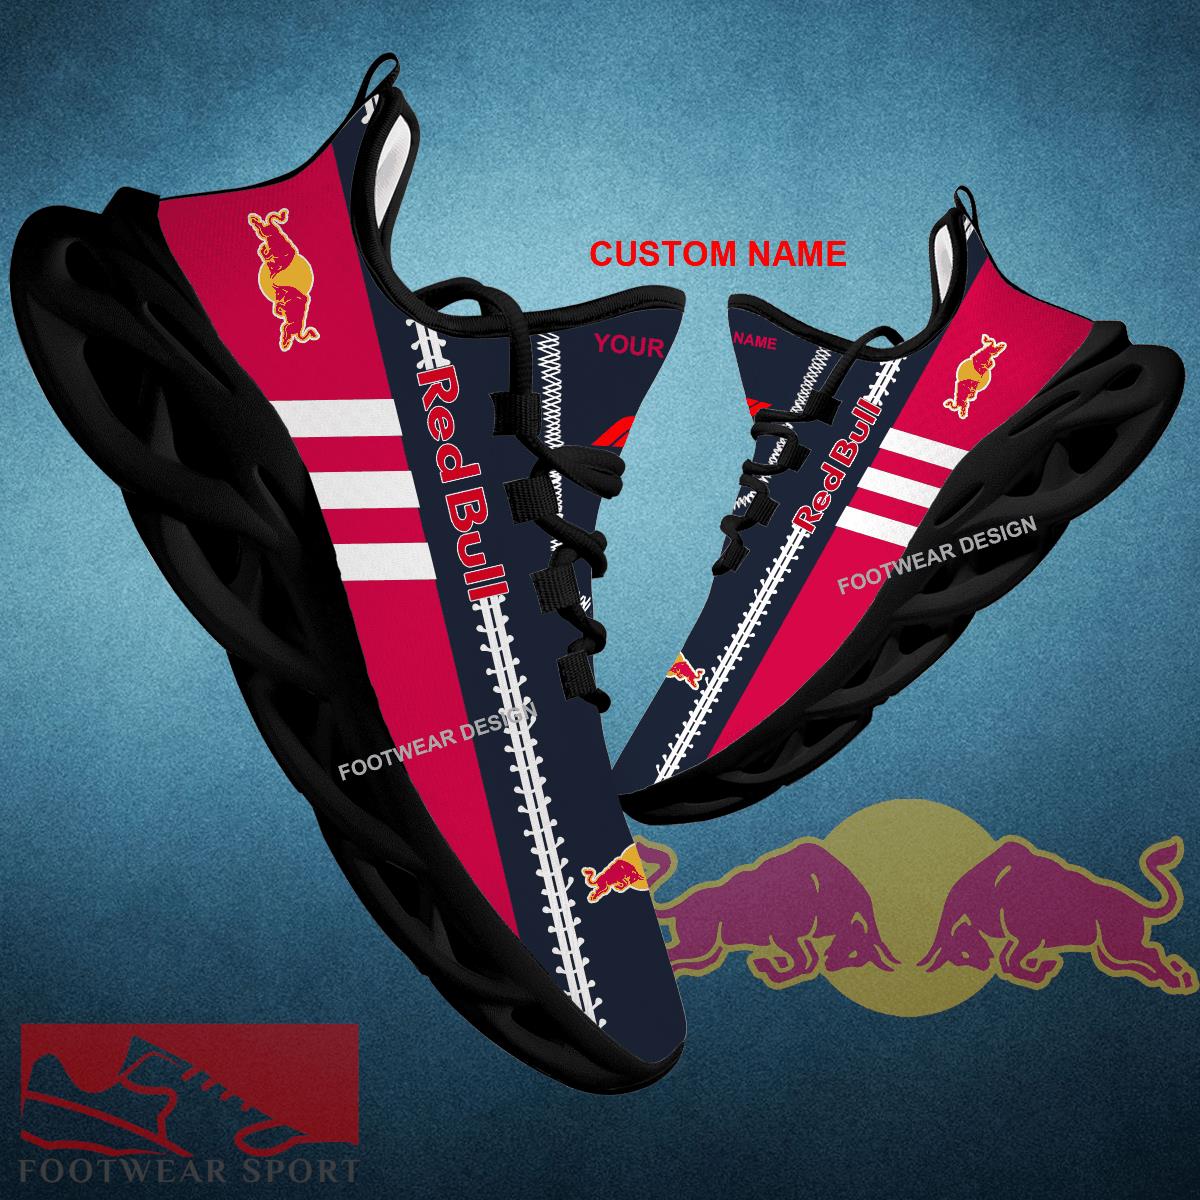 F1 Racing Oracle Red Bull Racing Chunky Shoes New Design Gift Fans Max Soul Sneakers Personalized - F1 Racing Oracle Red Bull Racing Logo New Chunky Shoes Photo 1